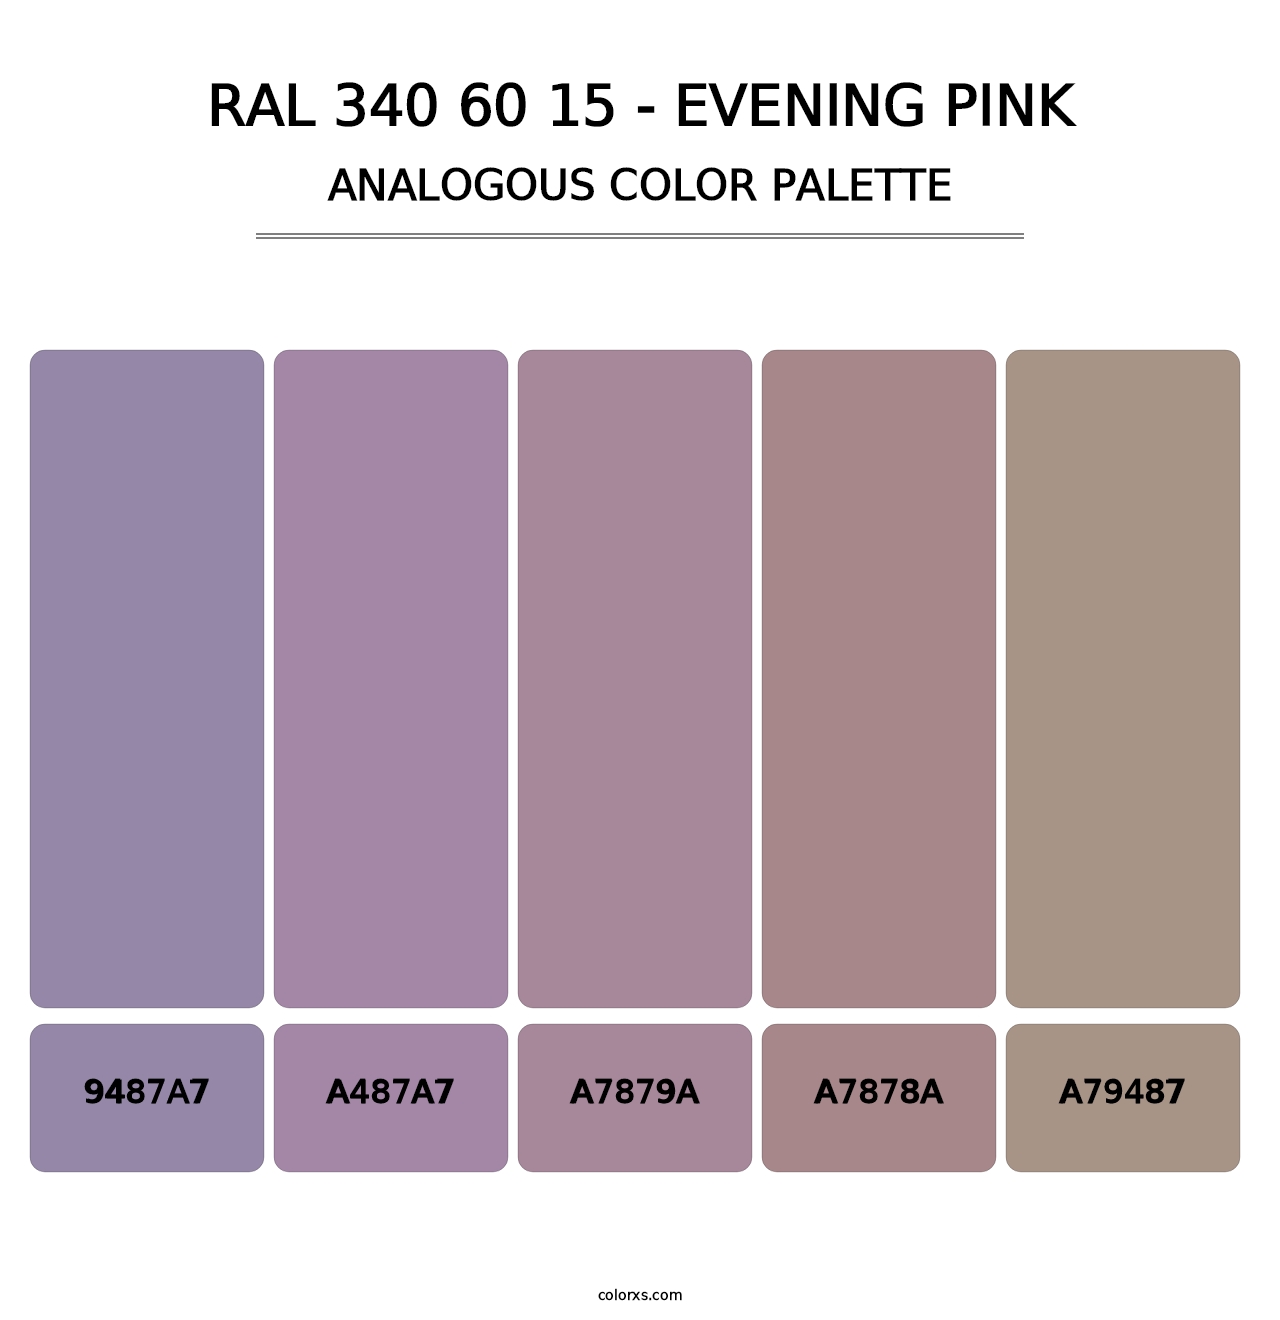 RAL 340 60 15 - Evening Pink - Analogous Color Palette